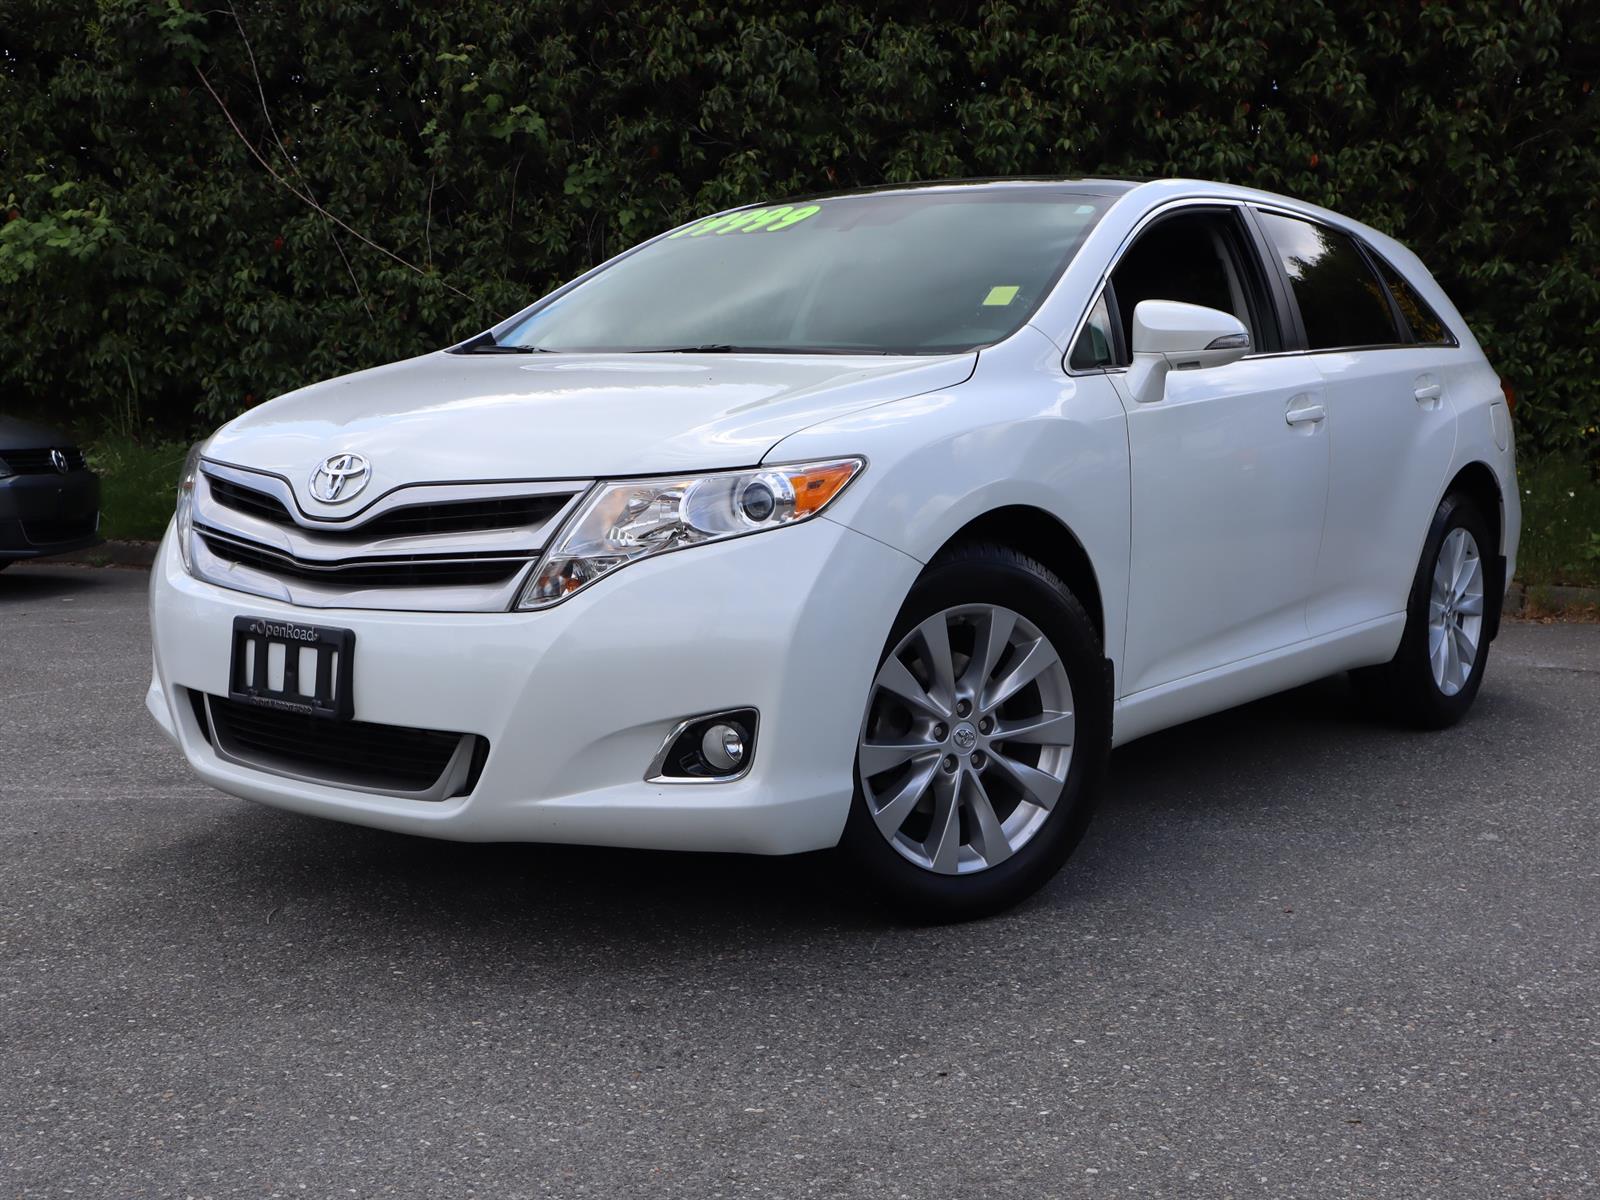 Toyota Venza for sale The Car Guide